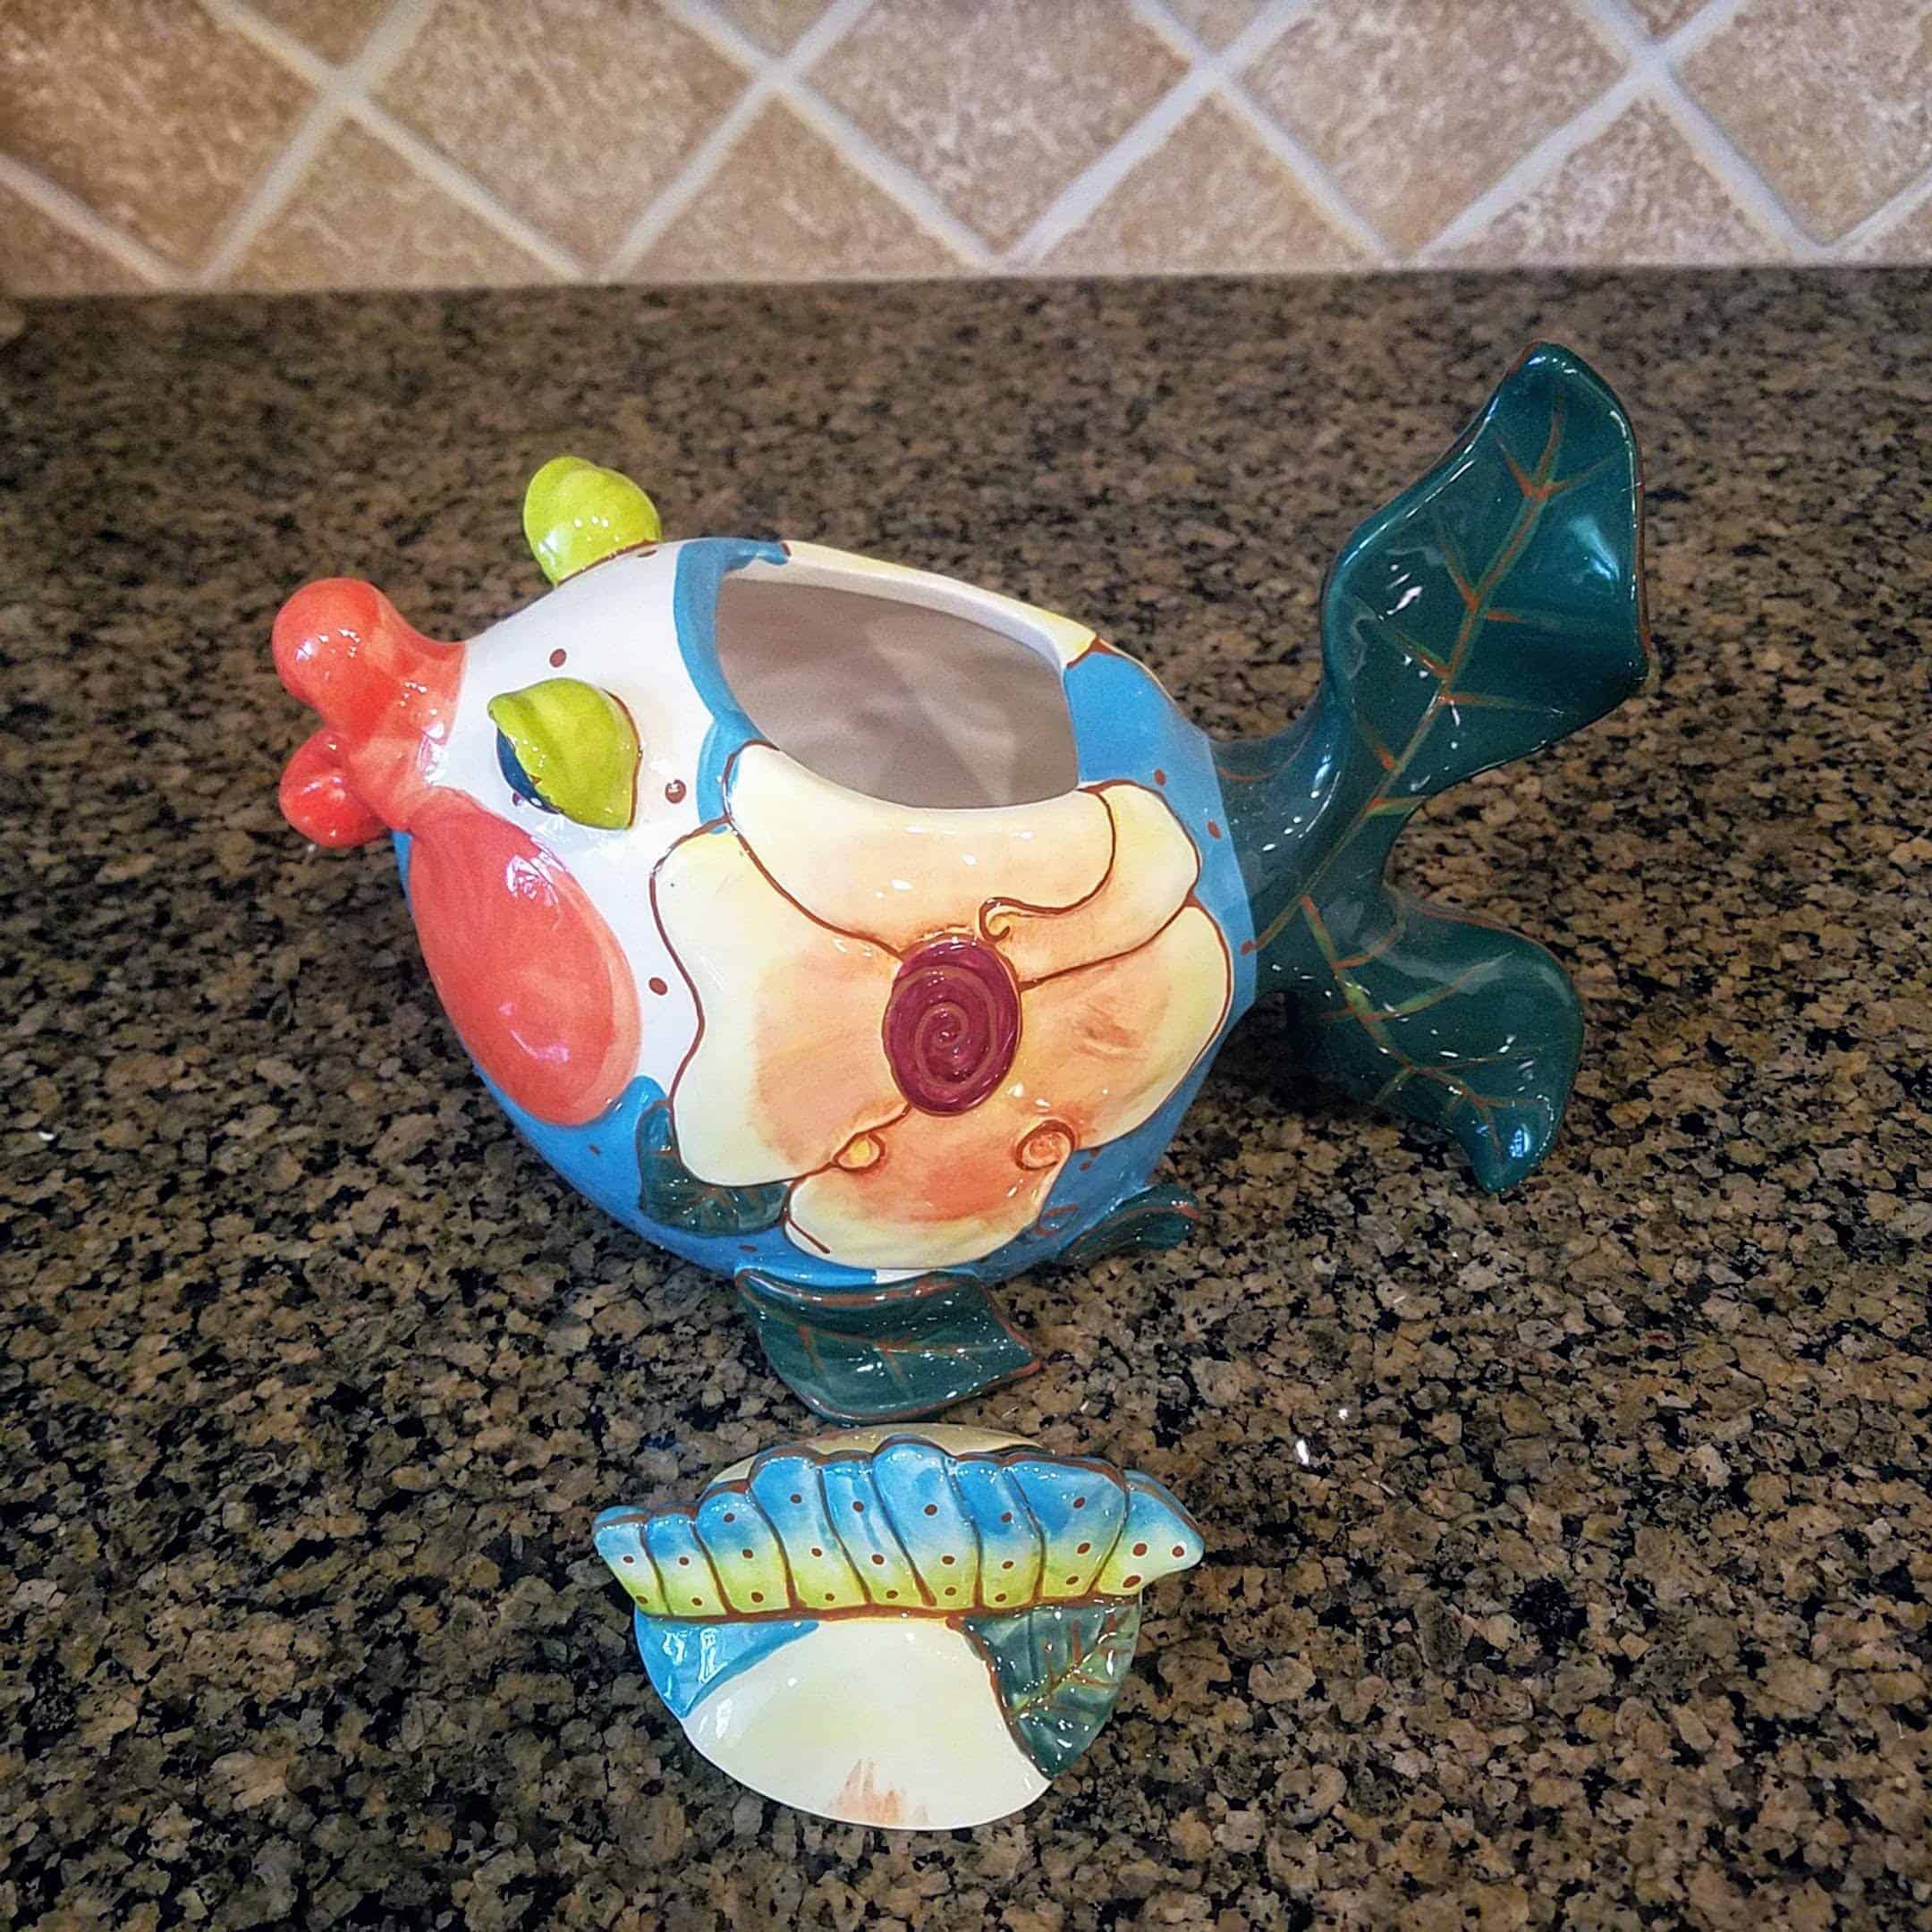 This Miss Lorelei Teapot is made with love by Premier Homegoods! Shop more unique gift ideas today with Spots Initiatives, the best way to support creators.